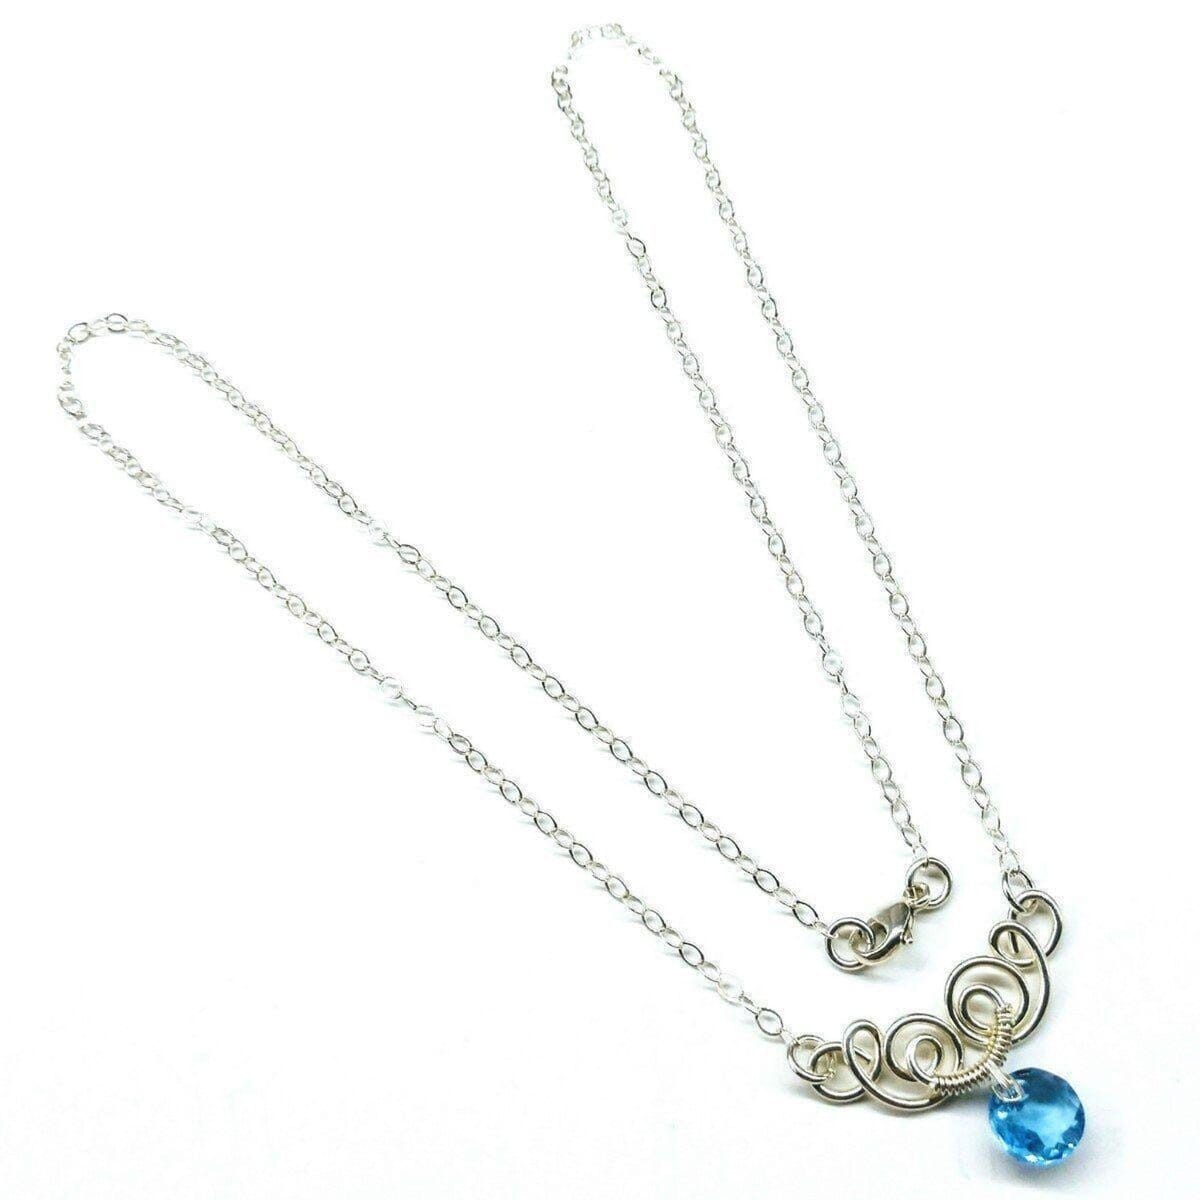 Silver Wire Sculpted Round Aqua Crystal Pendant Necklace by Alexa Martha Designs